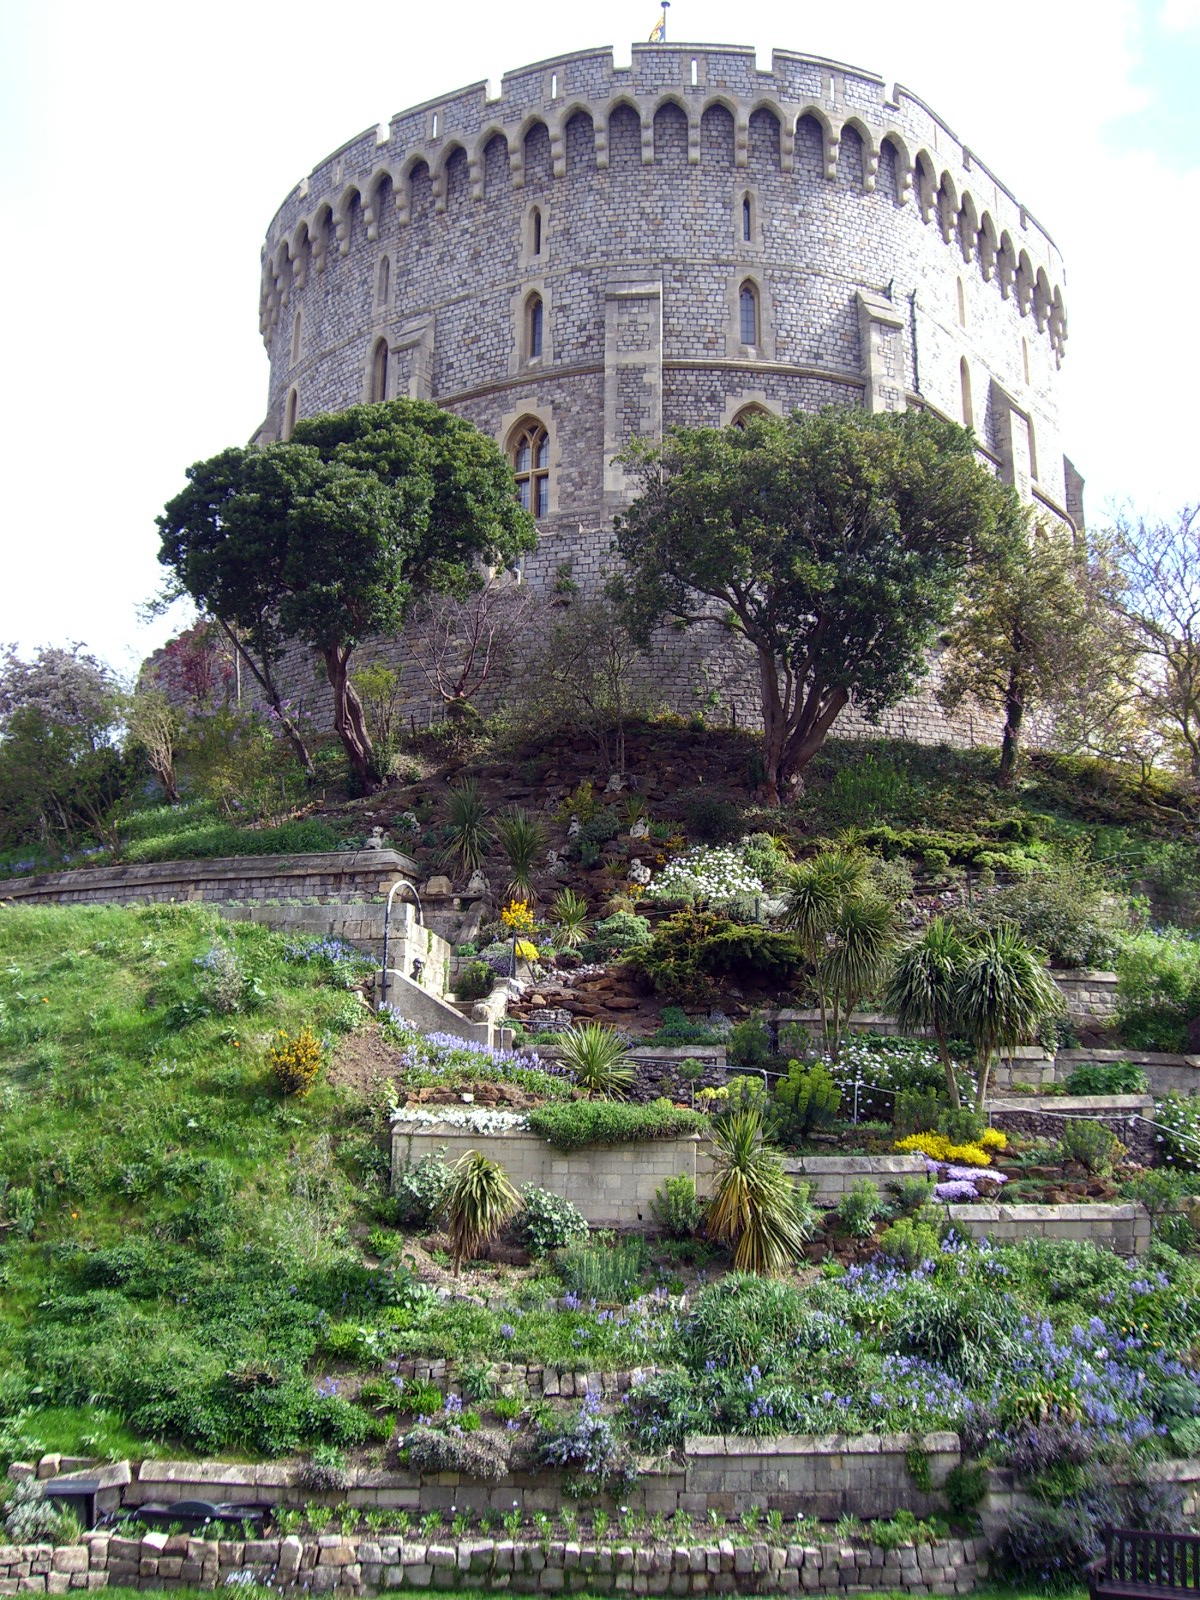 Castle turret with terraced garden